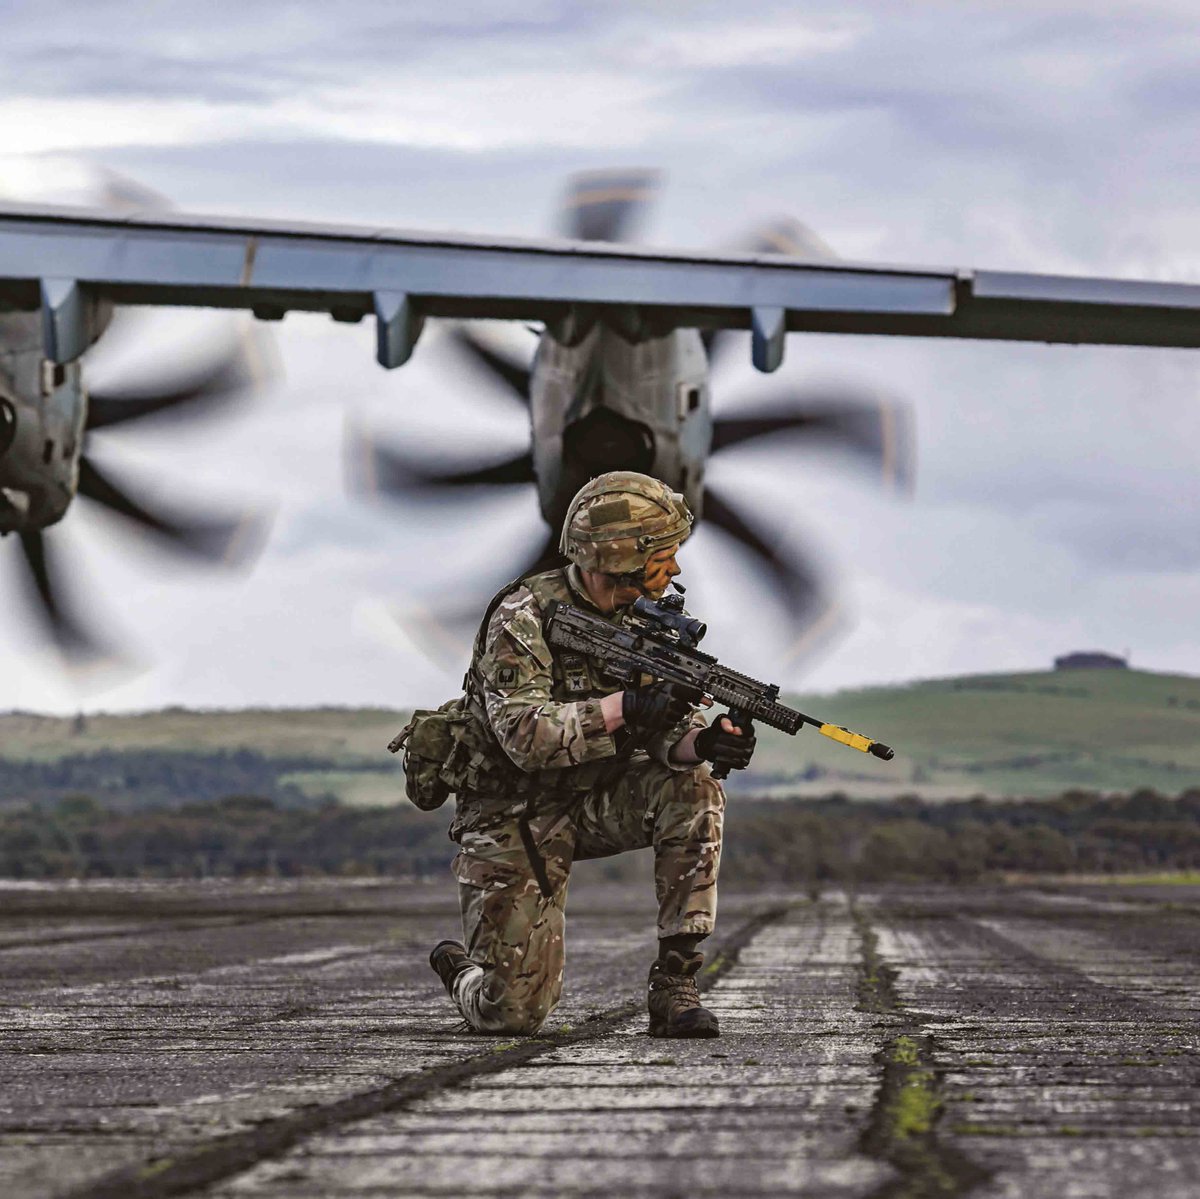 12 Days of @RAF images for Christmas - Day 4! II Squadron RAF Regiment deployed alongside  Air Mobility Forces as part of Excercise Tartan Spirit. The training saw RAF Gunners protect Hercules and Atlas aircrafts
#RAFCalendars  #12DaysOfRAF #ChristmasCountdown